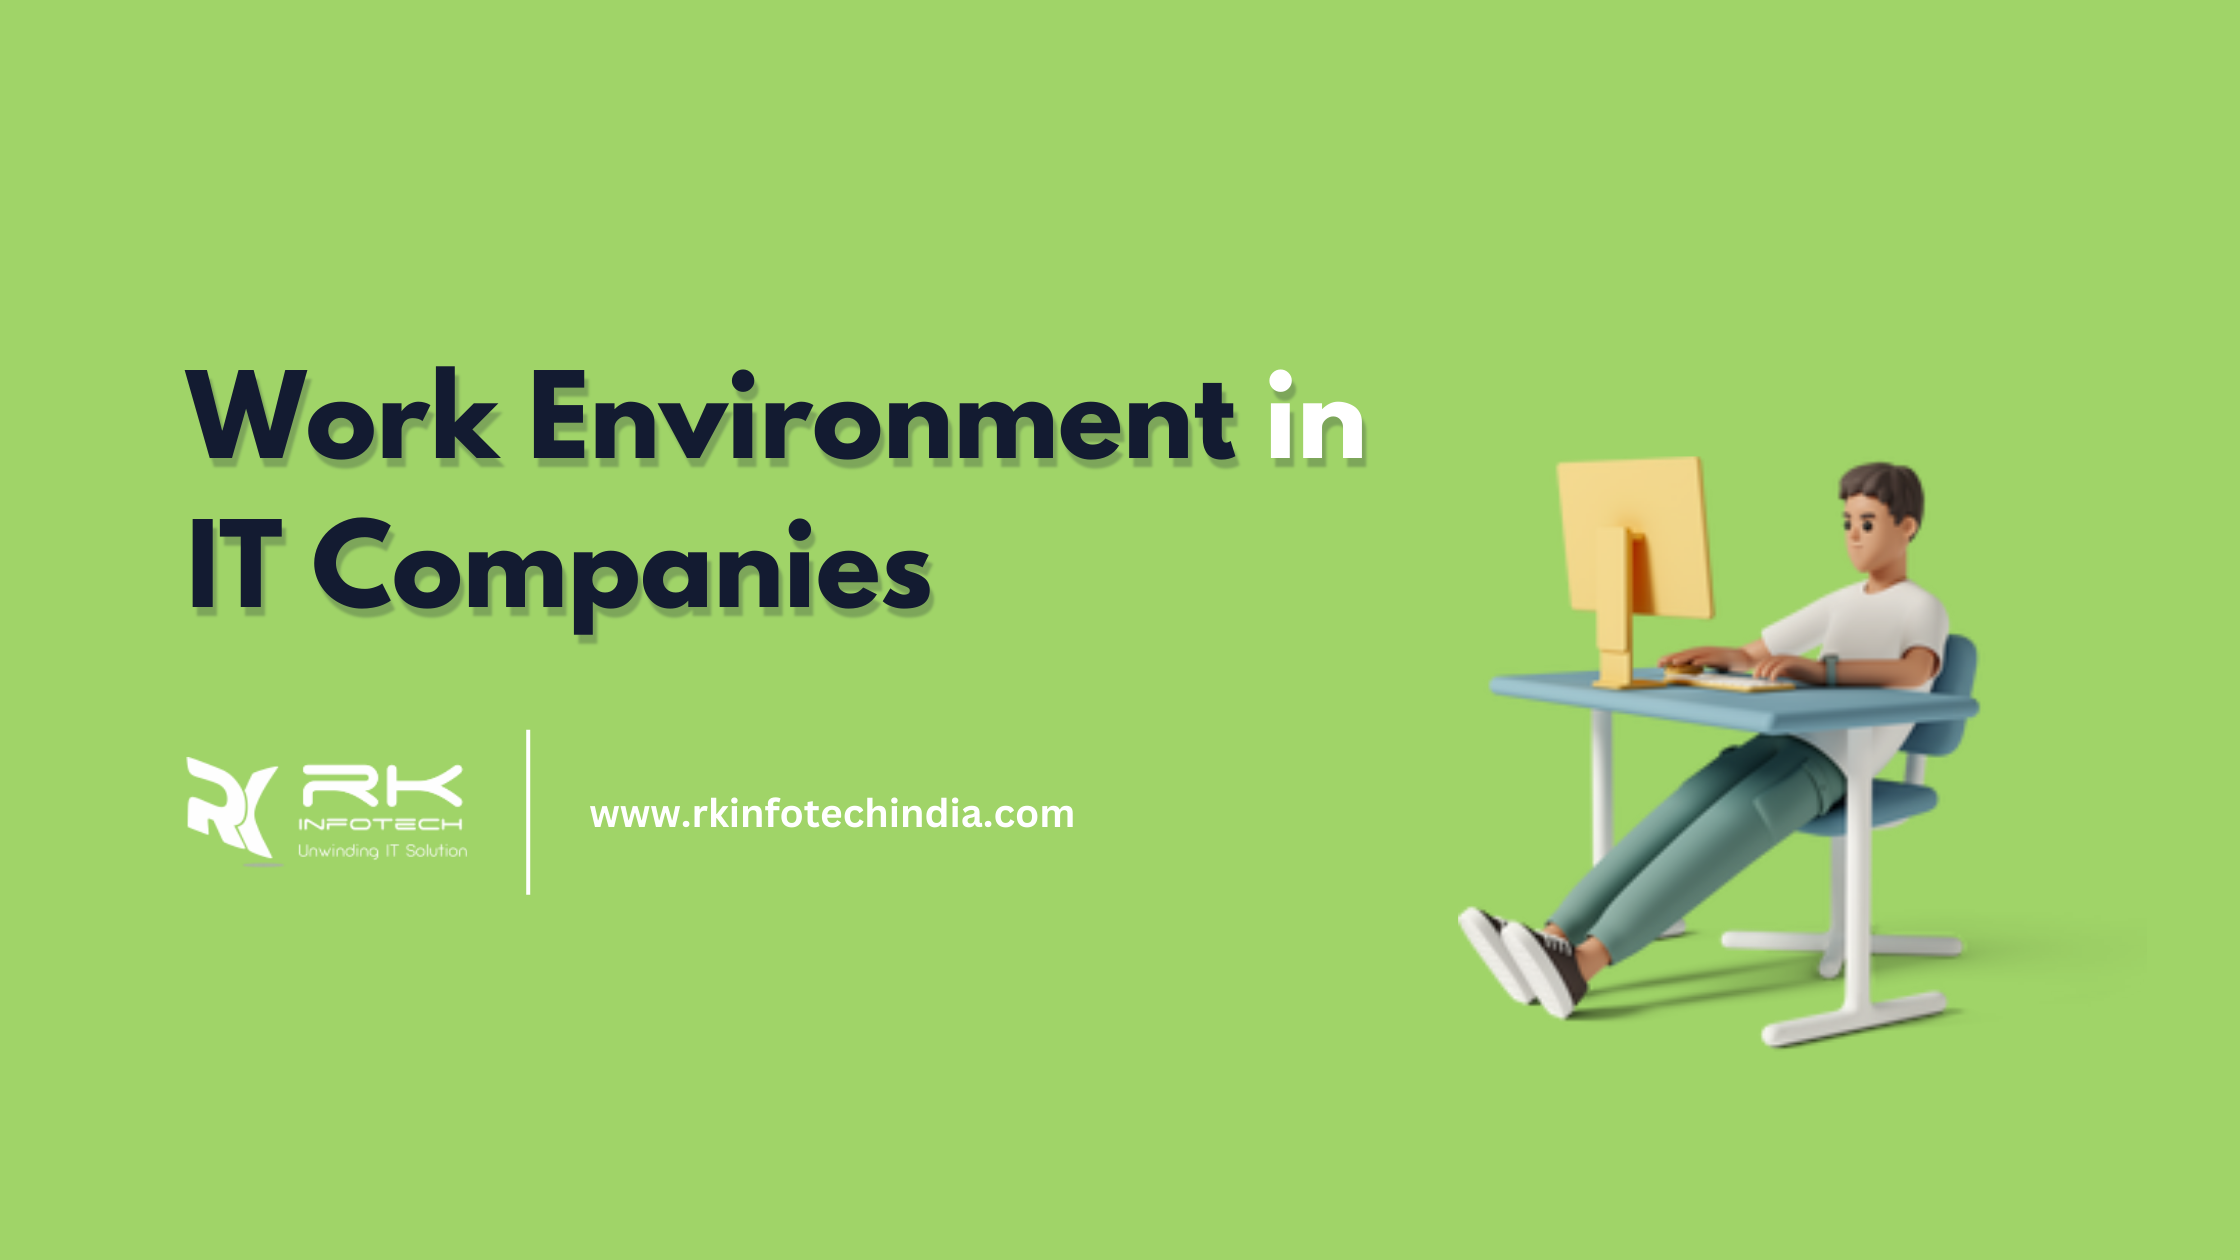 Work Environment in IT Companies